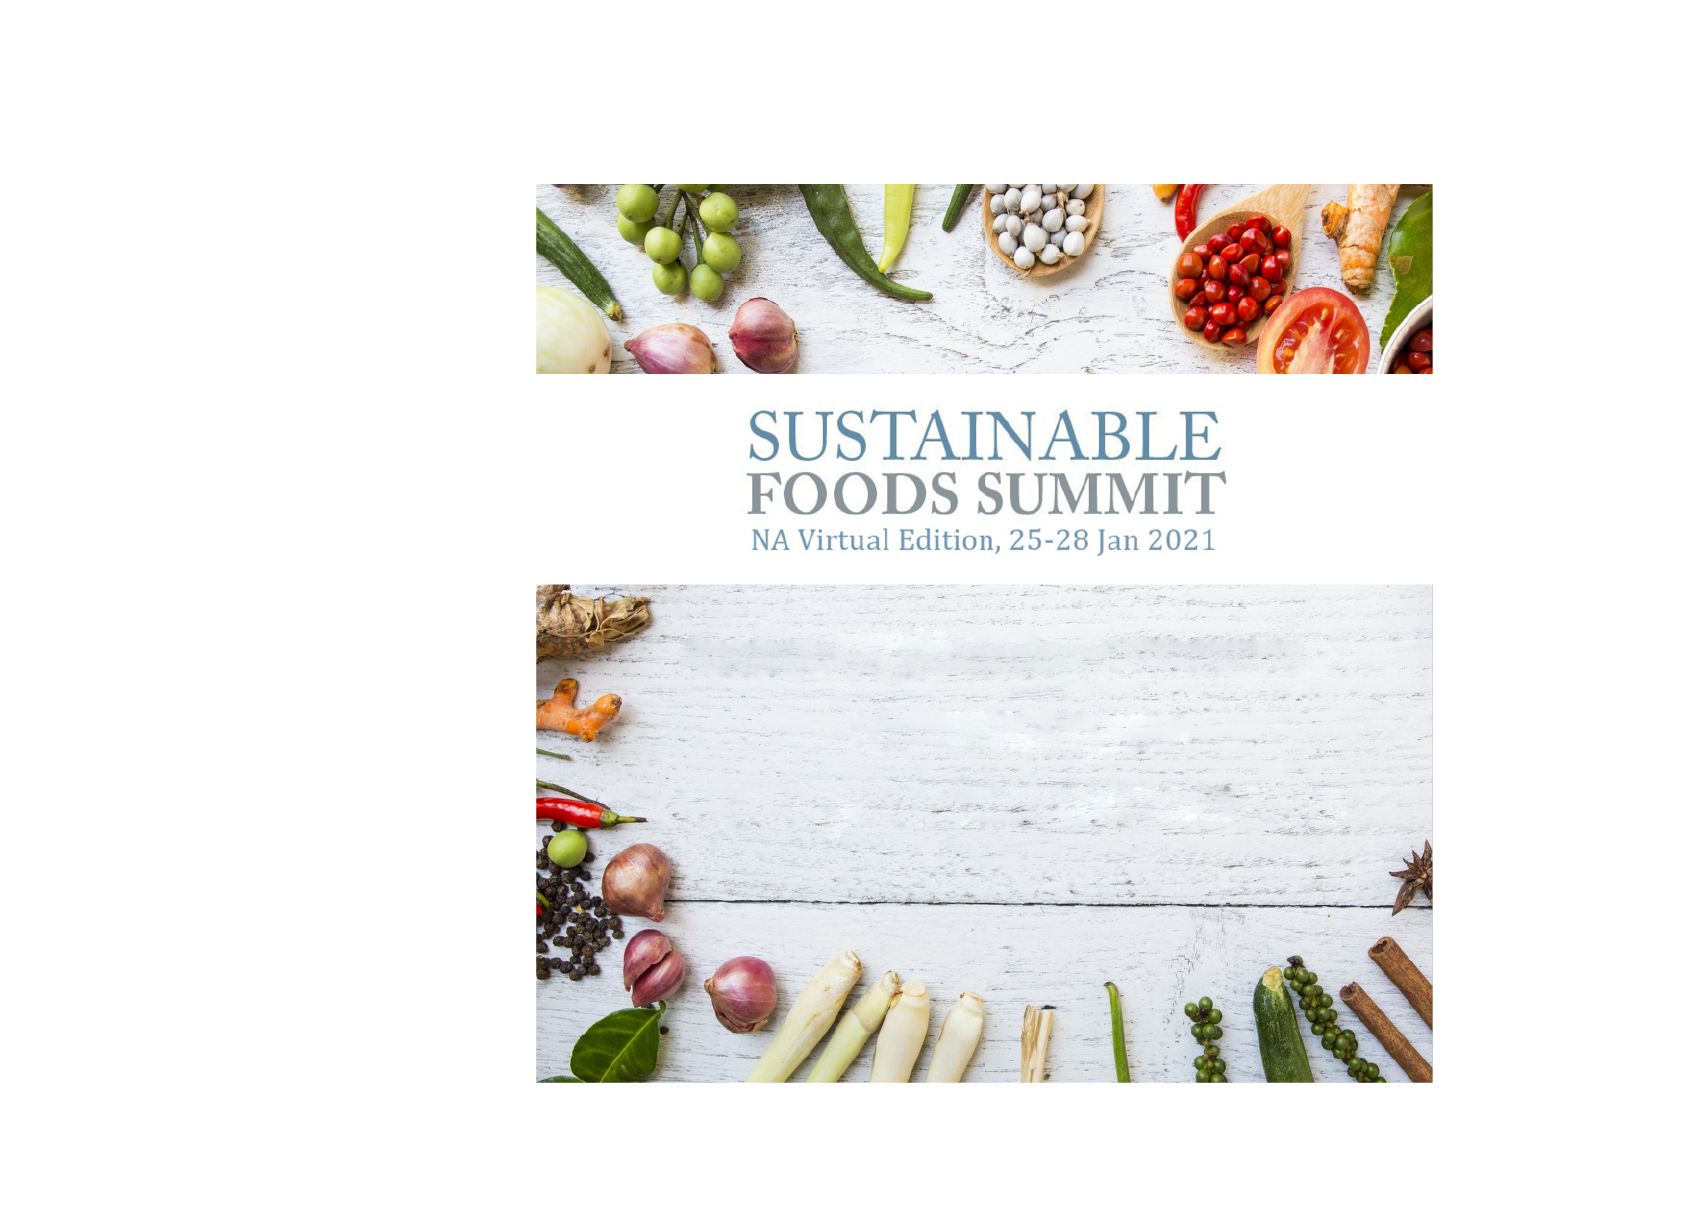 Attend the Sustainable Foods Summit Jan 25-28